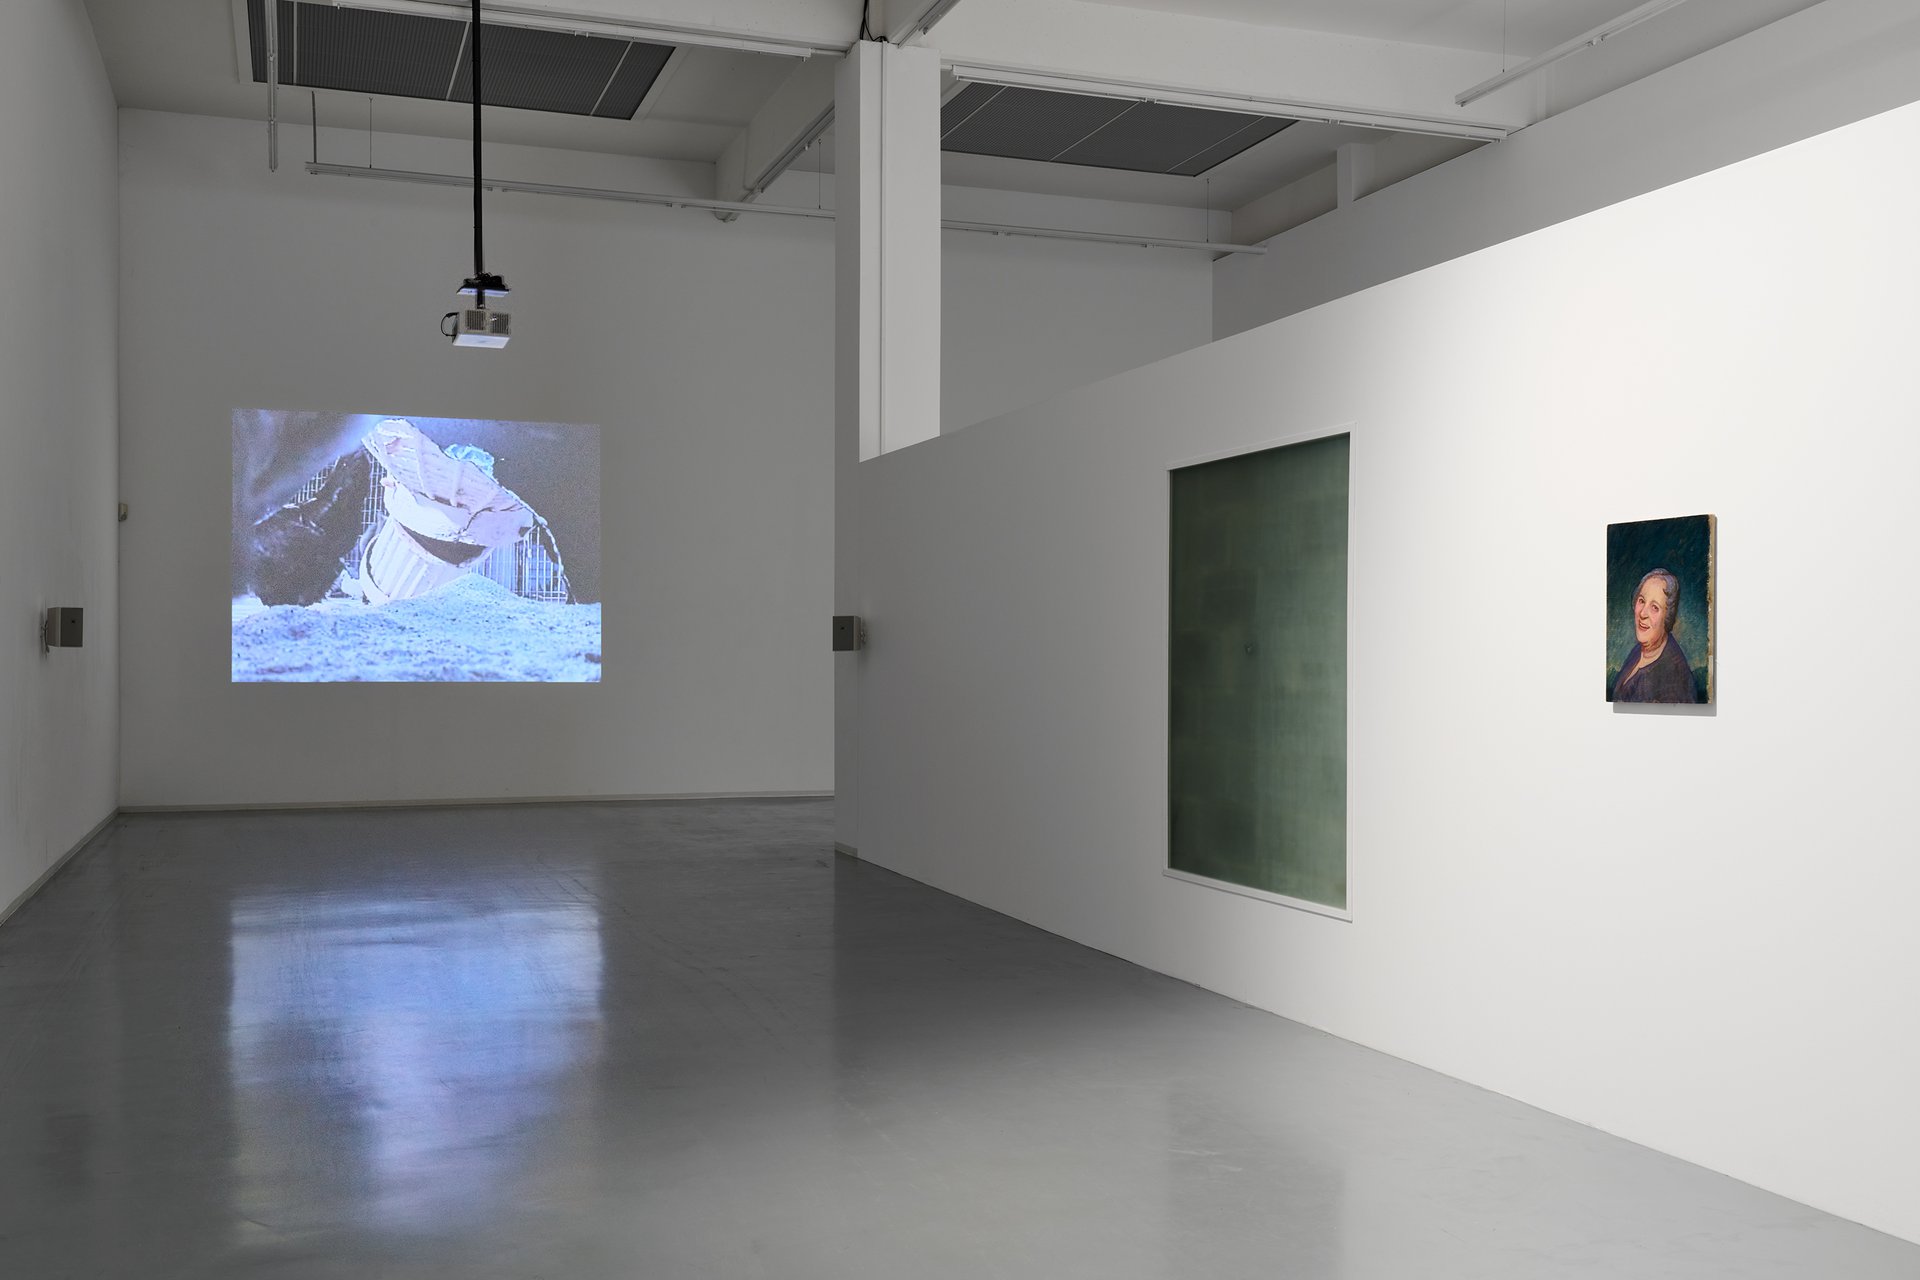 The Holding Environment, Bonner Kunstverein, 2021, Installation view with f.l.t.r.: Pope.L, Small Cup, 2008; Ada Frände, Fenster II, 2021; Michael Fullerton, Vidal Sassoon‘s Mother, 2021. Photo: Mareike Tocha. Courtesy of the artists, Greene Naftali, New York, and Mitchell-Innes &amp; Nash, New York.